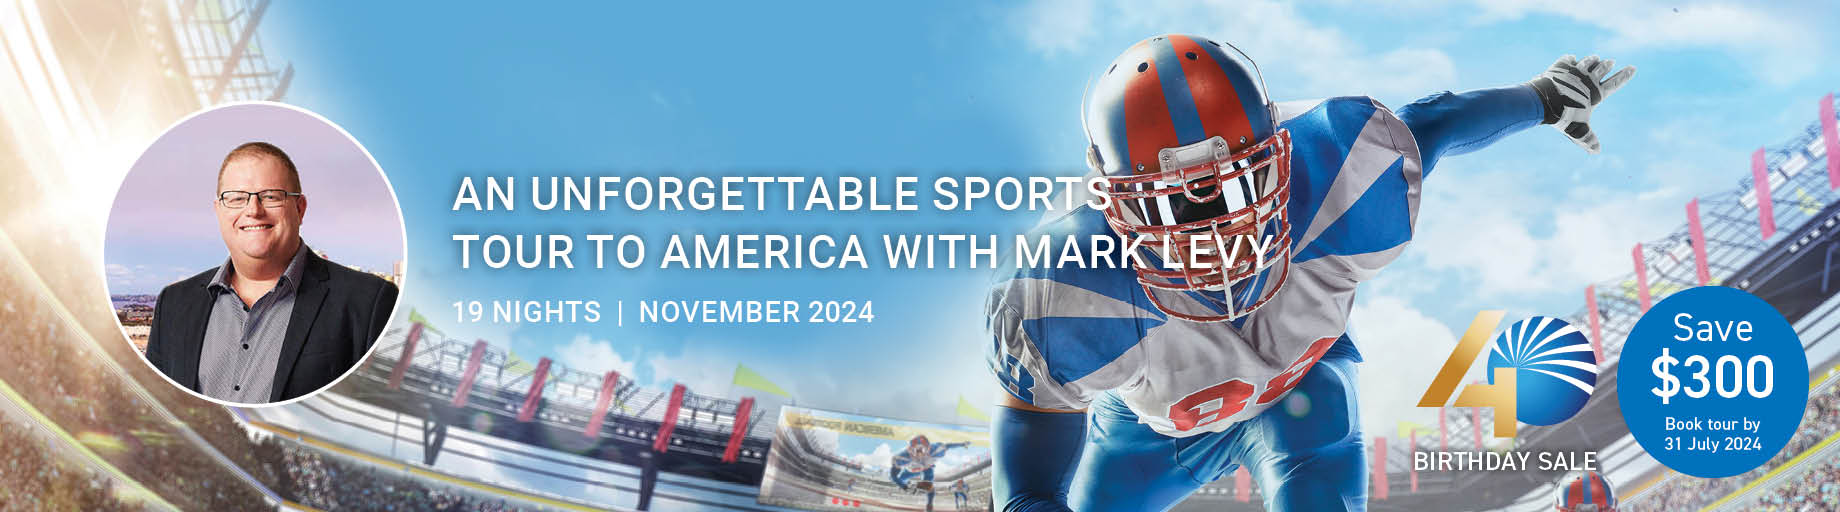 Sports Experience Tour of the USA with Mark Levy